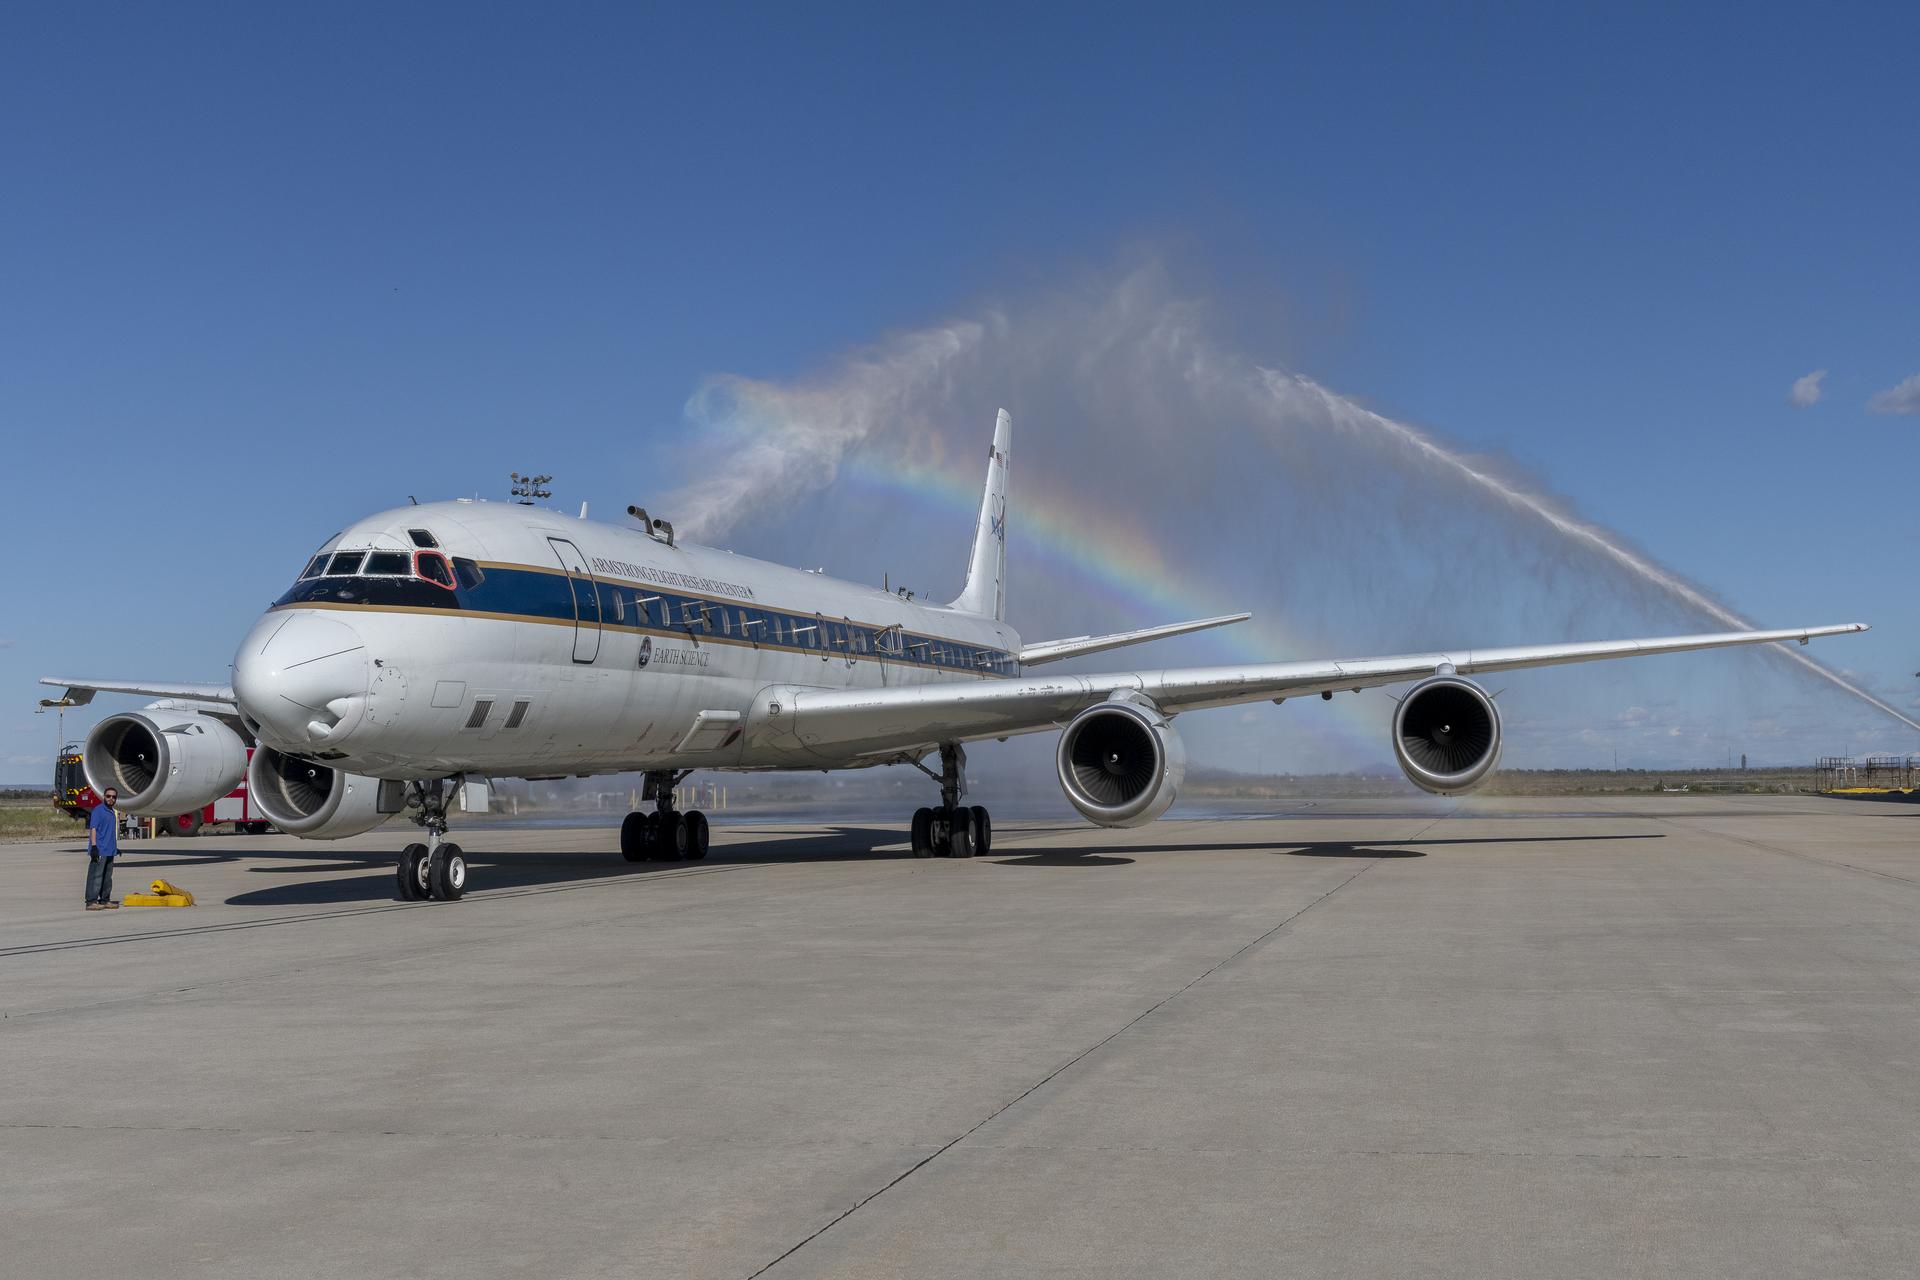 An aircraft taxis through a water salute streaming from water hoses from two firetrucks positioned on either side of the aircraft. The converging water streams create a rainbow above the aircraft as it passes under the arc of spraying water.